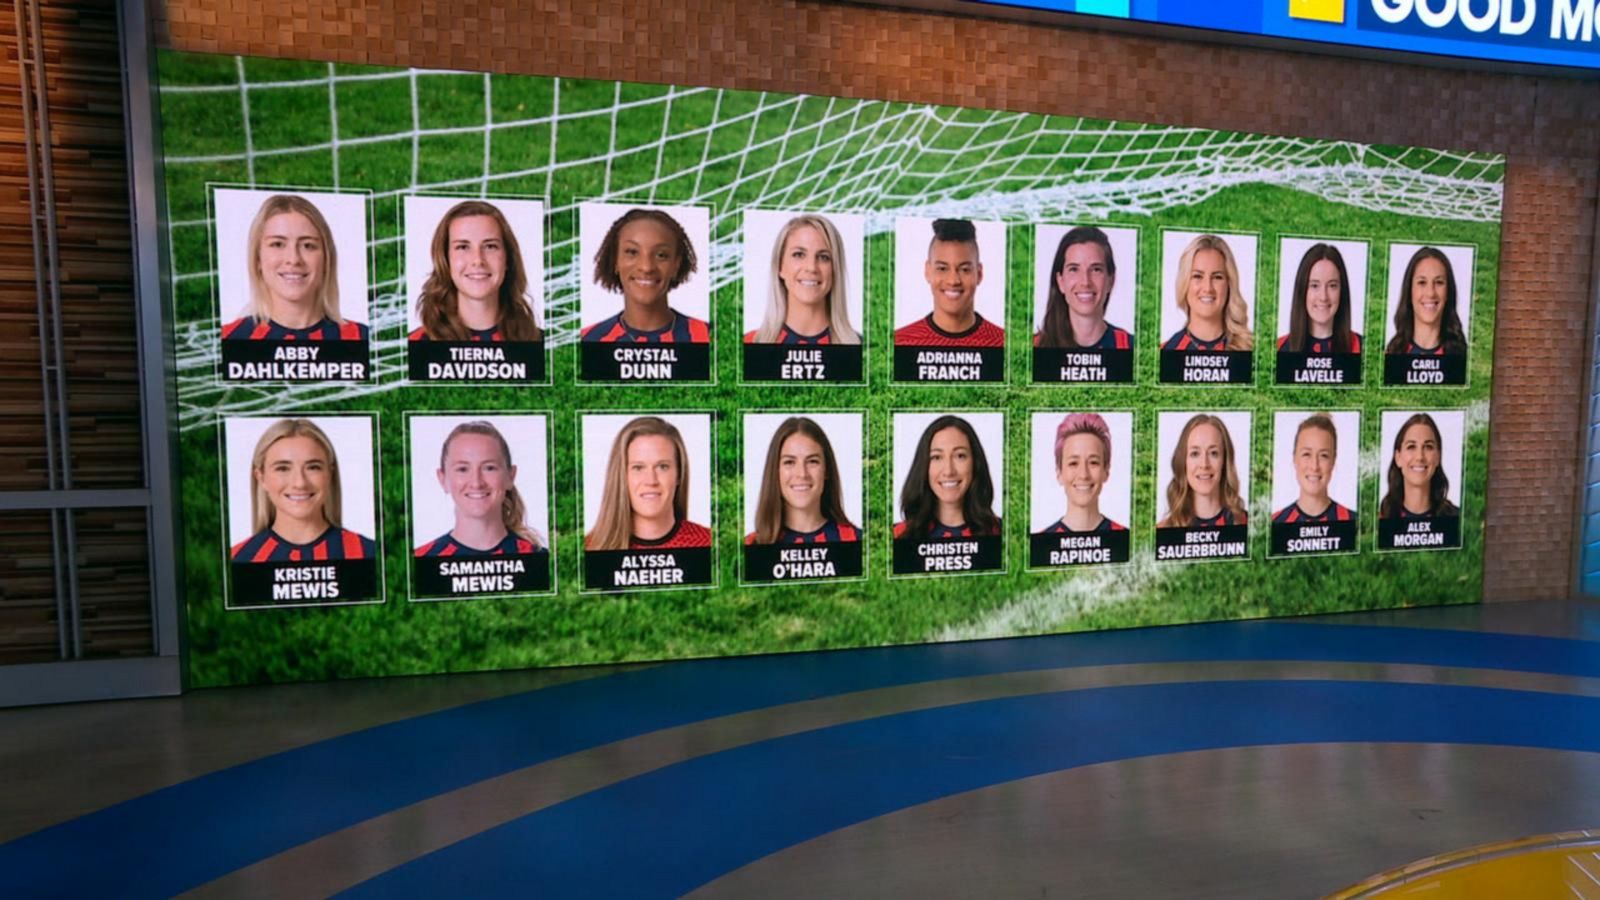 1st look at the USWNT 2020 Olympics team Good Morning America